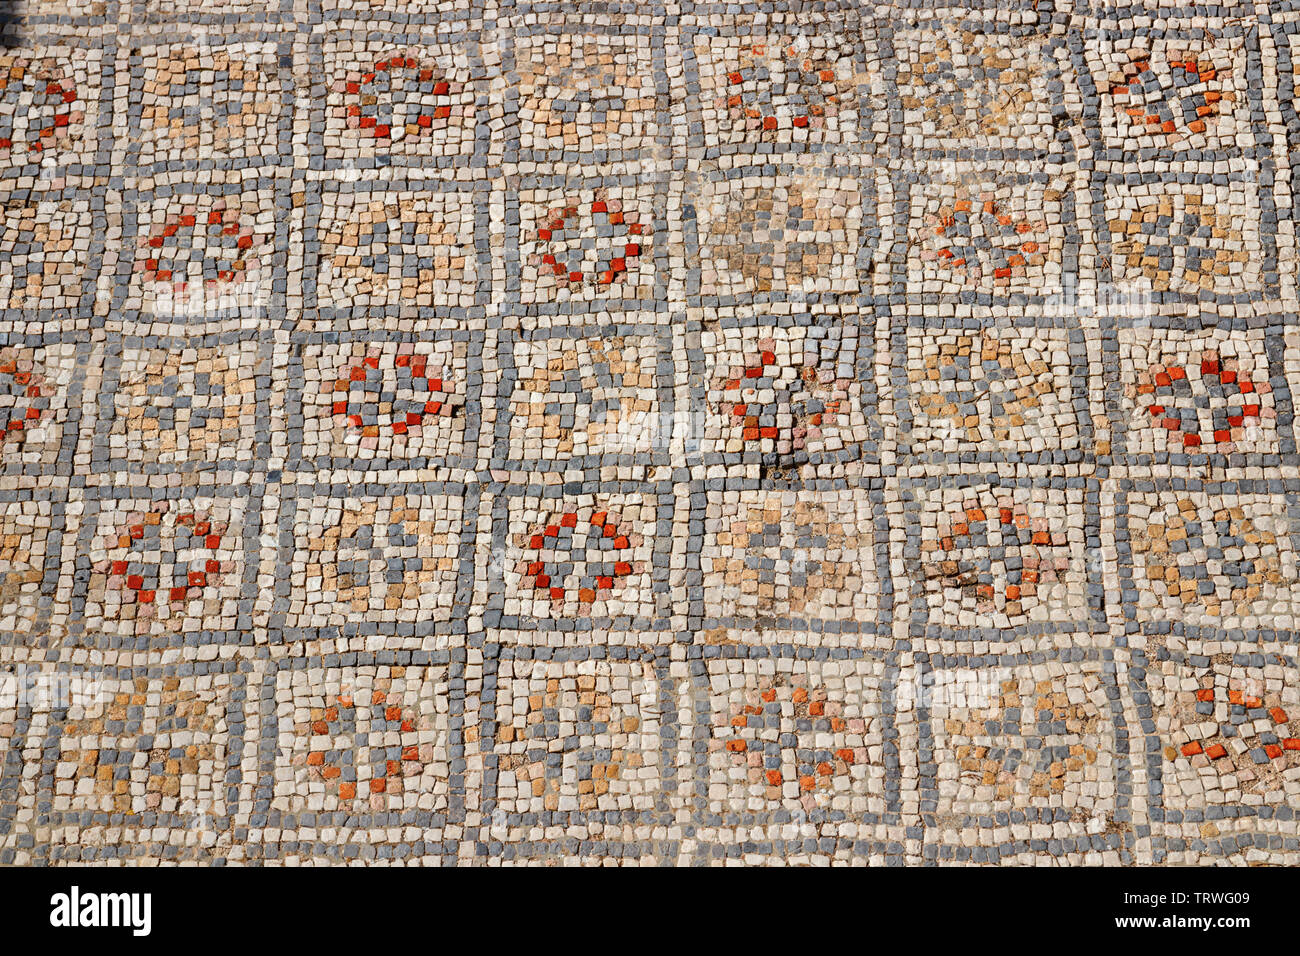 Colorful mosaic floor with symmetrical patterns in one of the houses of the ancient roman city Volubilis, Morocco. Stock Photo